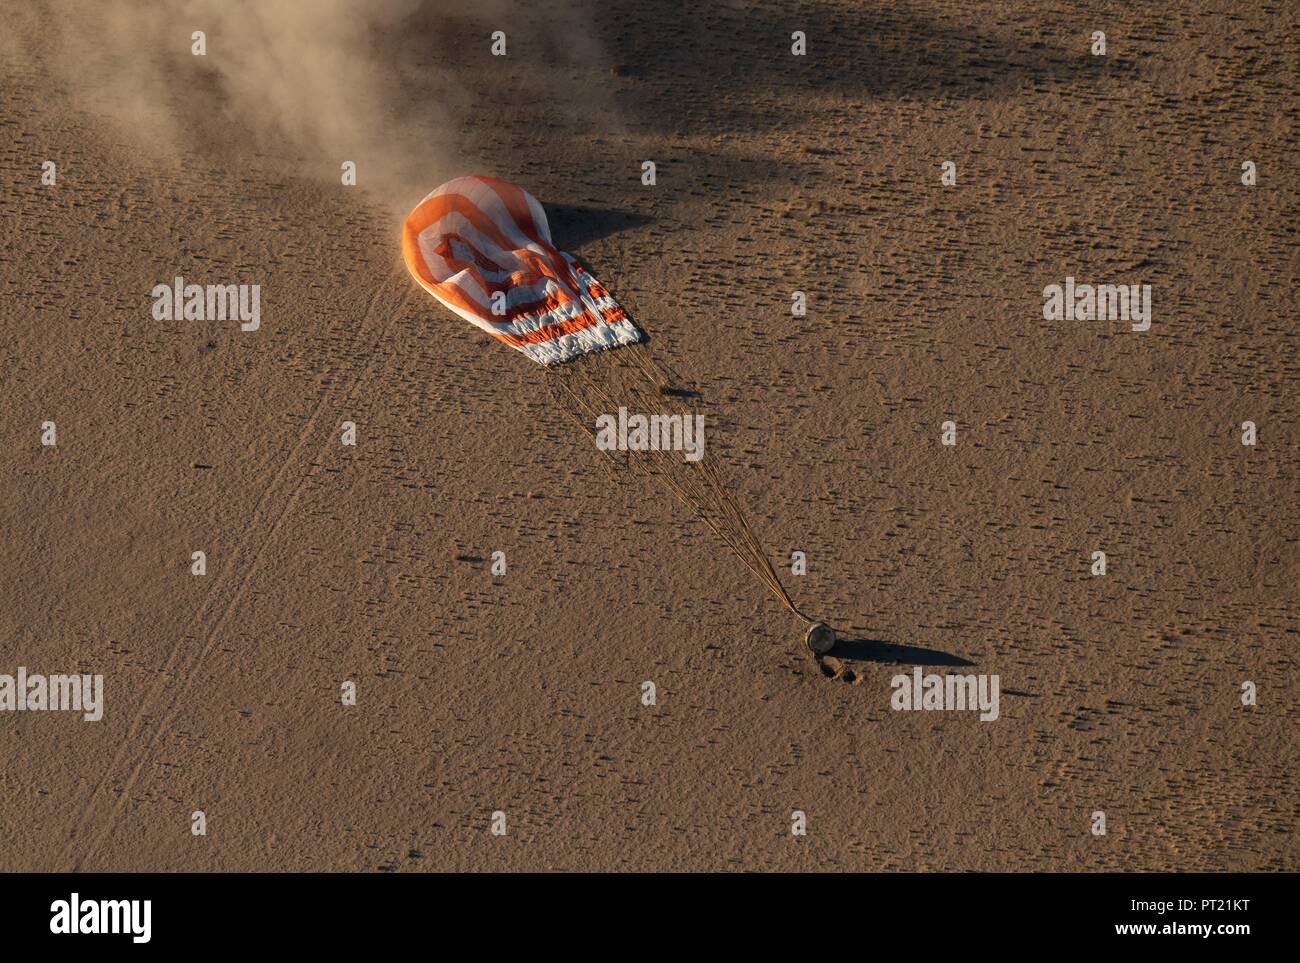 Zhezkazgan, Kazakhstan. 04th Oct, 2018. The Russian Soyuz MS-08 spacecraft lands with the International Space Station Expedition 56 crew October 4, 2018 near Zhezkazgan, Kazakhstan. American astronauts Drew Feustel and Ricky Arnold of NASA, along with Russian Soyuz Commander Oleg Artemyev are returning after 197 days in space. Credit: Planetpix/Alamy Live News Stock Photo